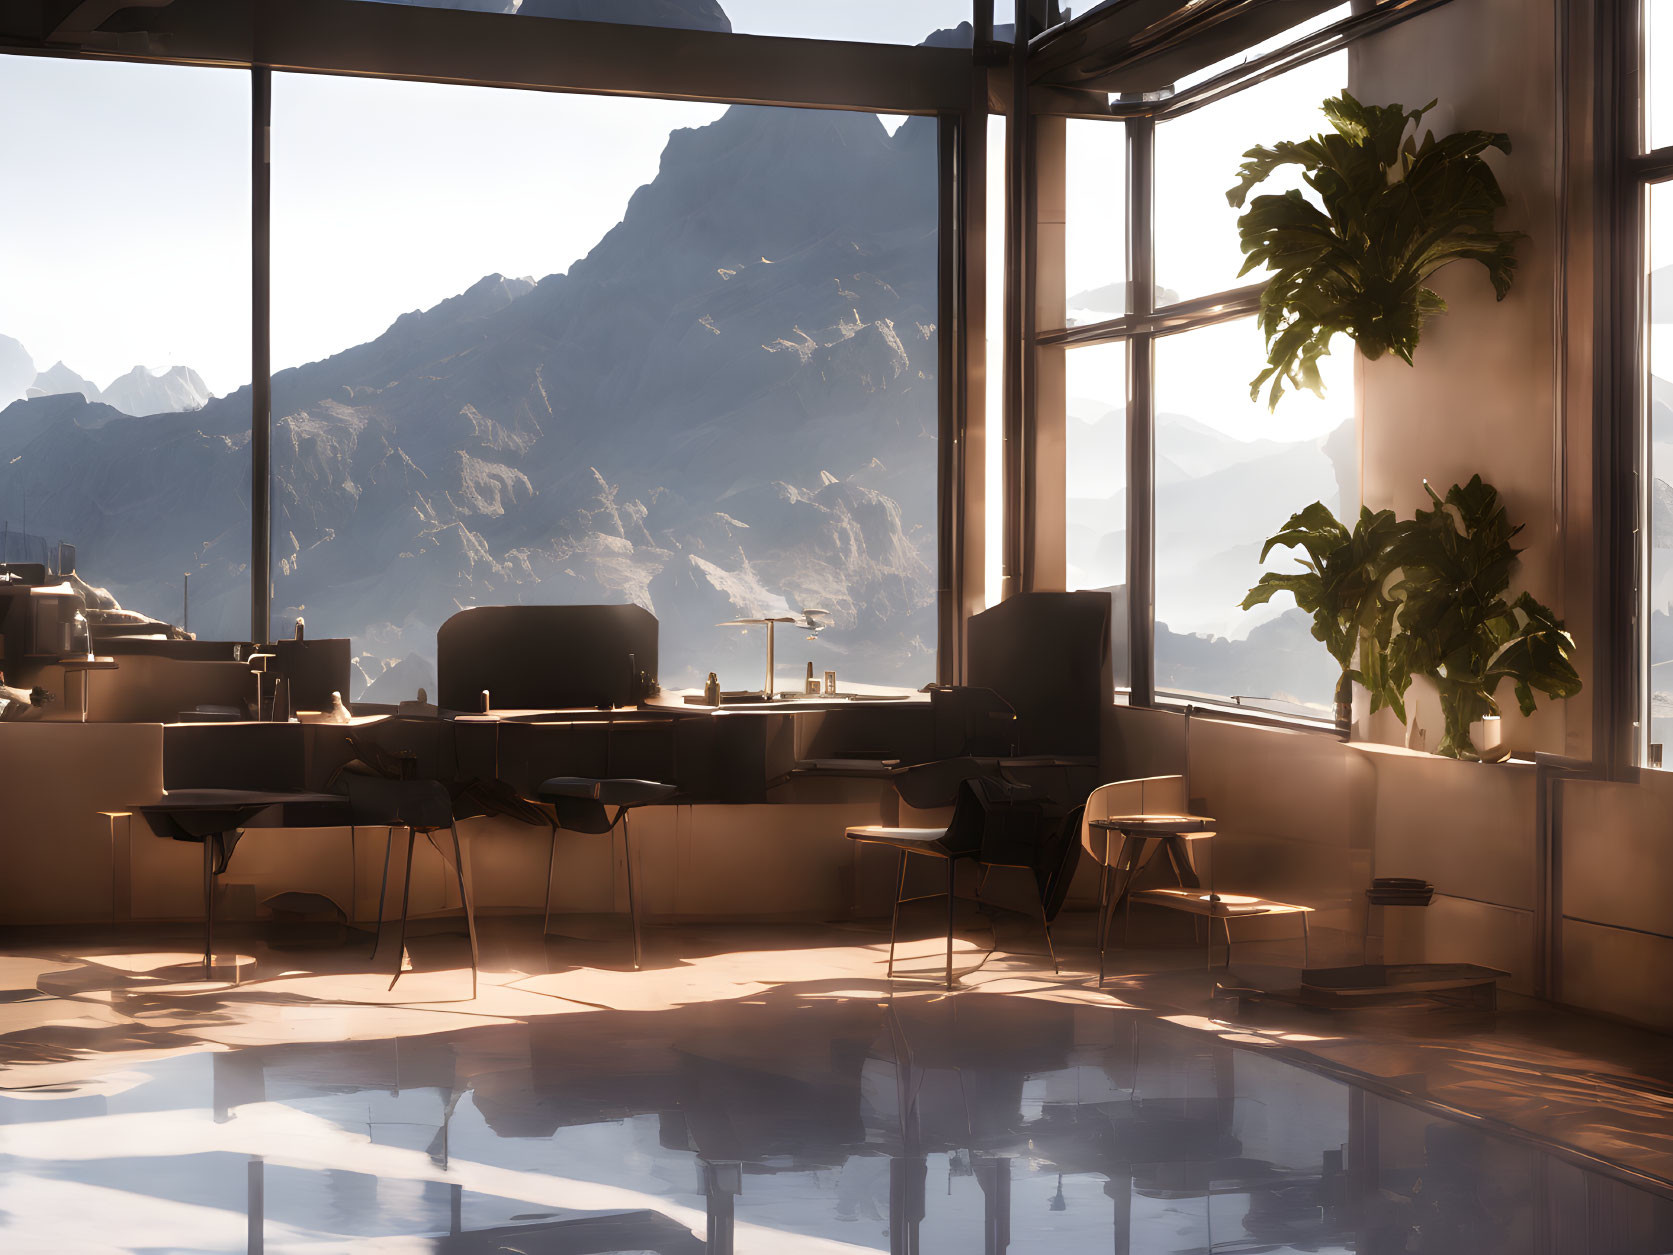 Modern office space with mountain view and golden sunlight.